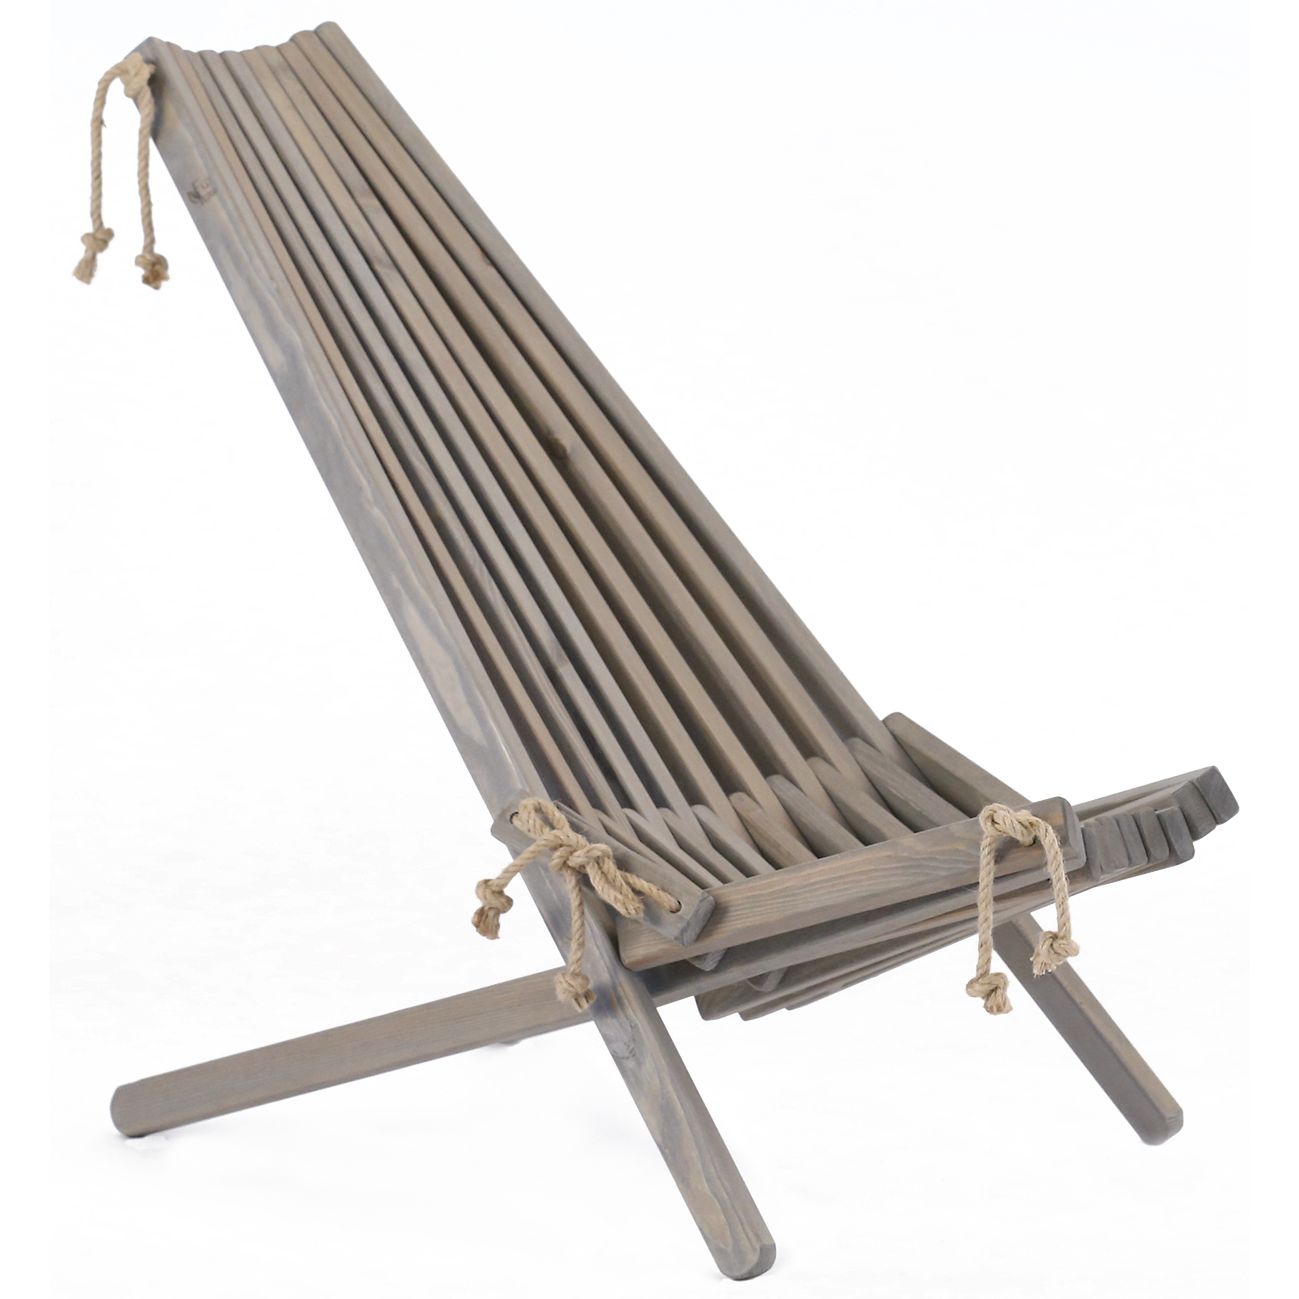 Fabulous Gifts Outdoor Furniture EcoFurn® Eco Chair - Grey Pine by Weirs of Baggot Street